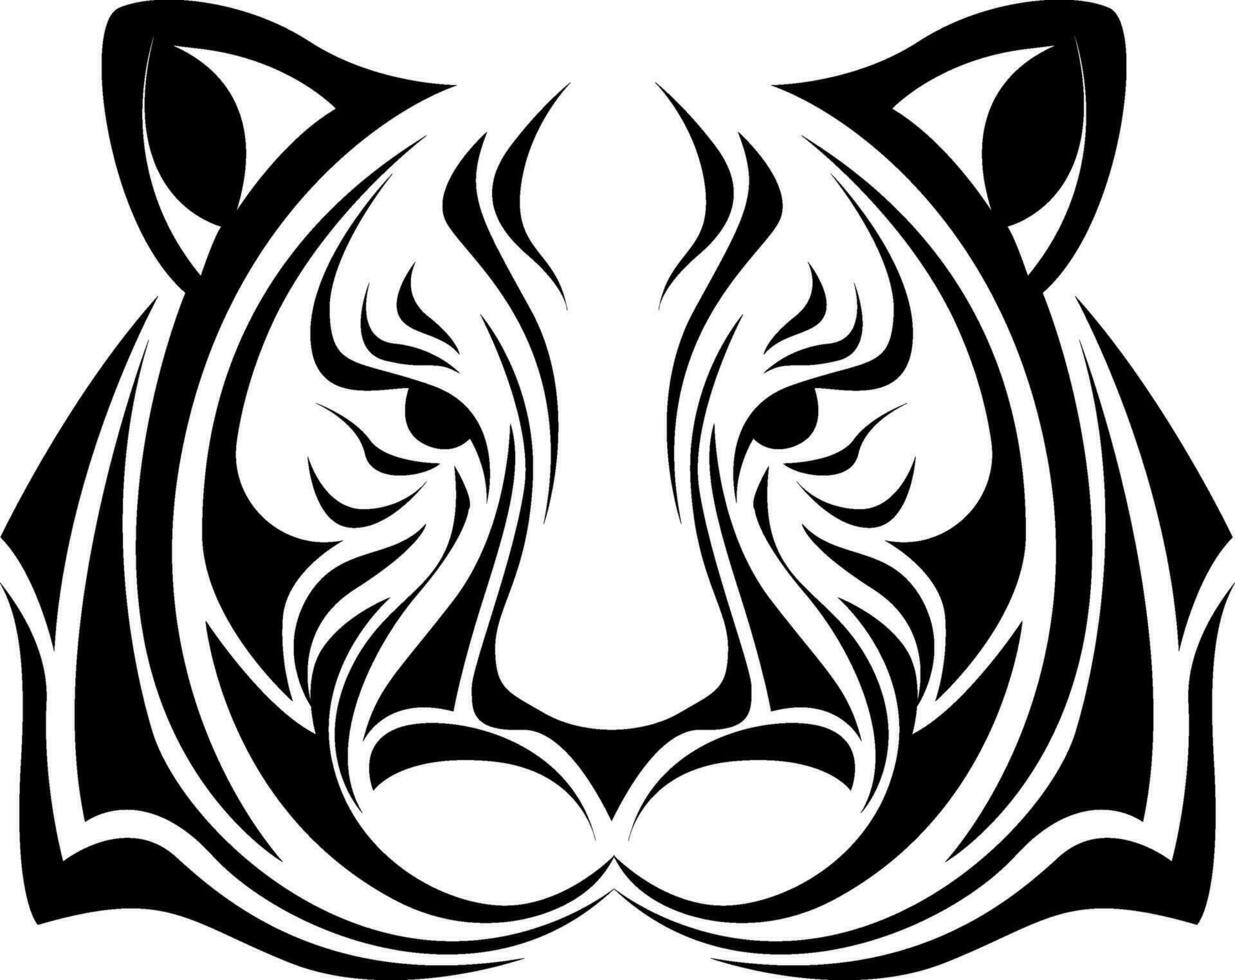 Tiger head tattoo, tattoo illustration, vector on a white background.